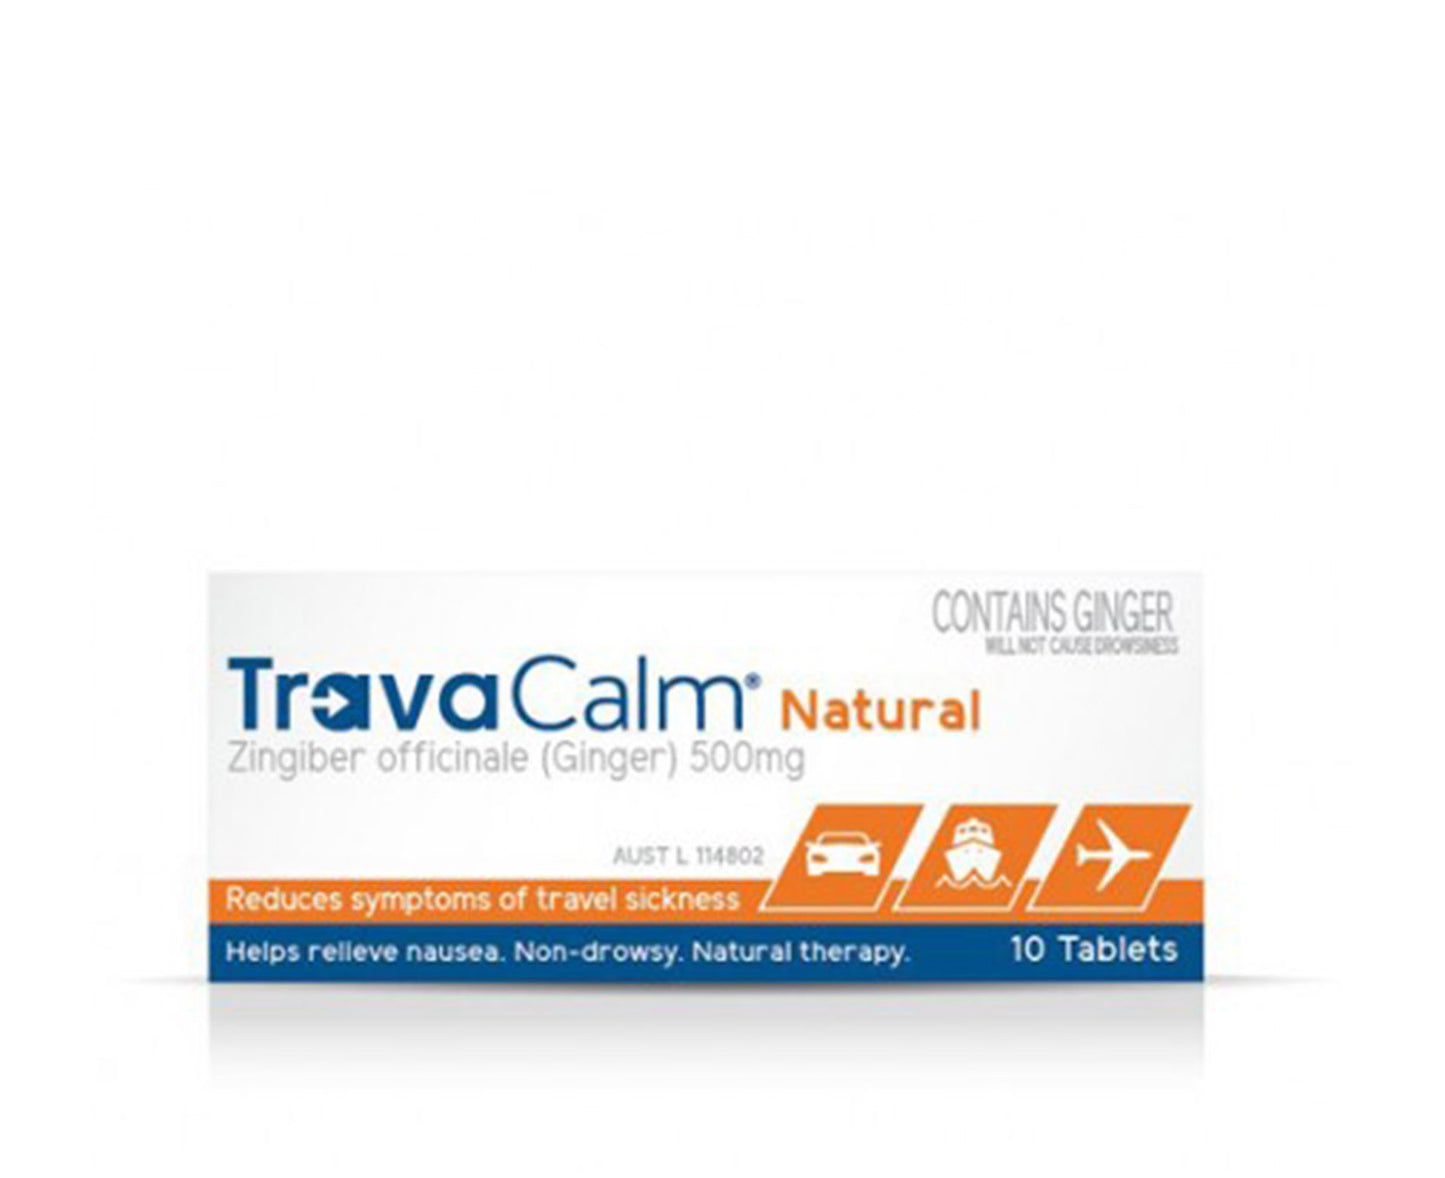 TravaCalm Natural Tablets 10